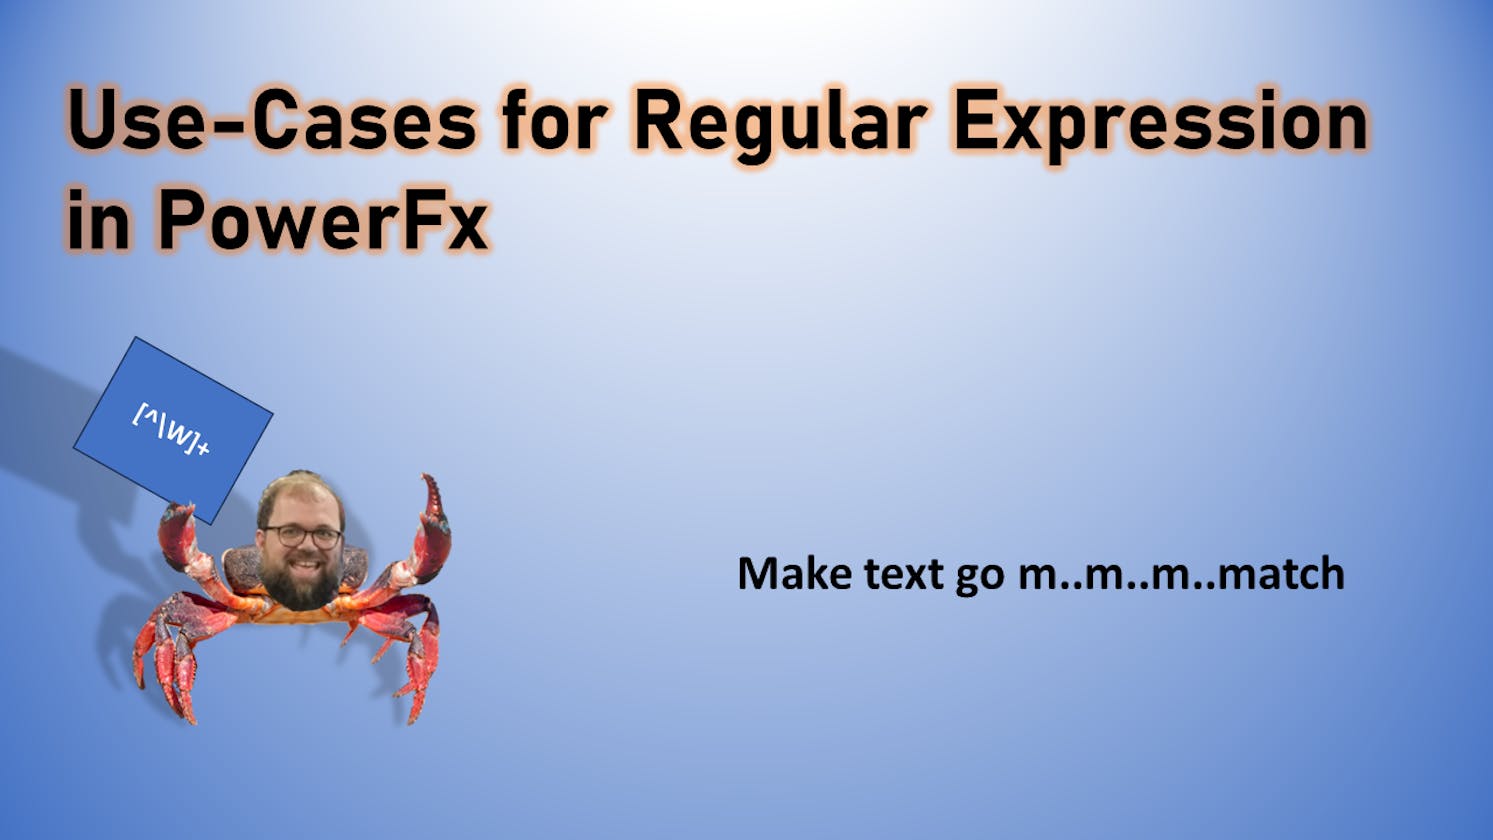 Use-Cases for Regular Expression in PowerFx